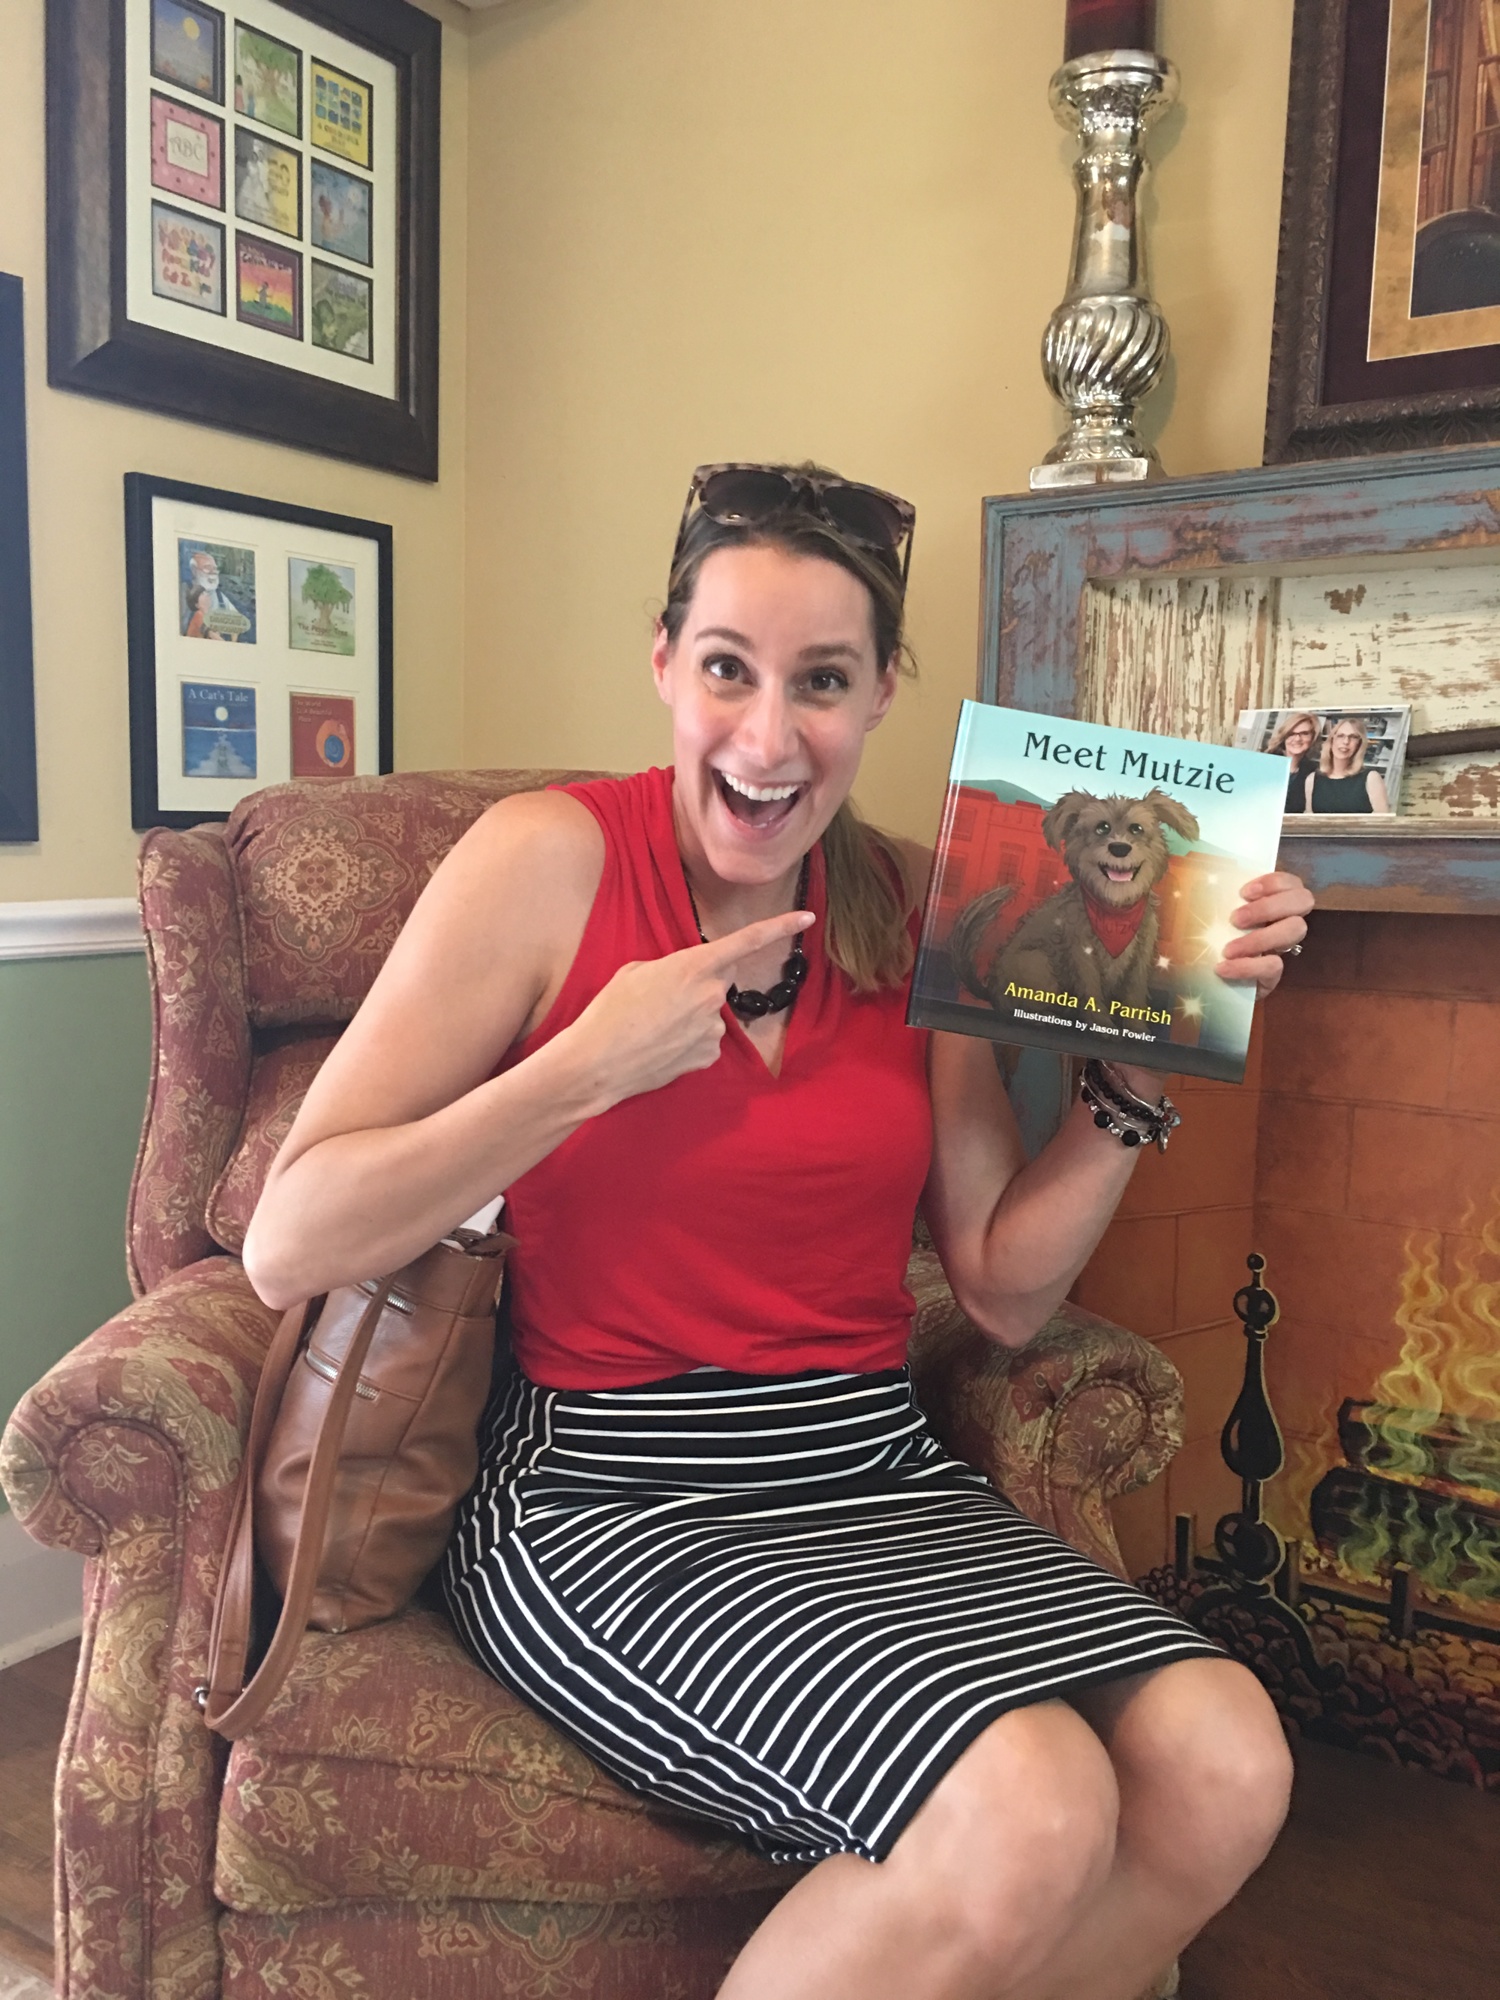 Amanda Parrish can't hold back her excitement on the day her new book 